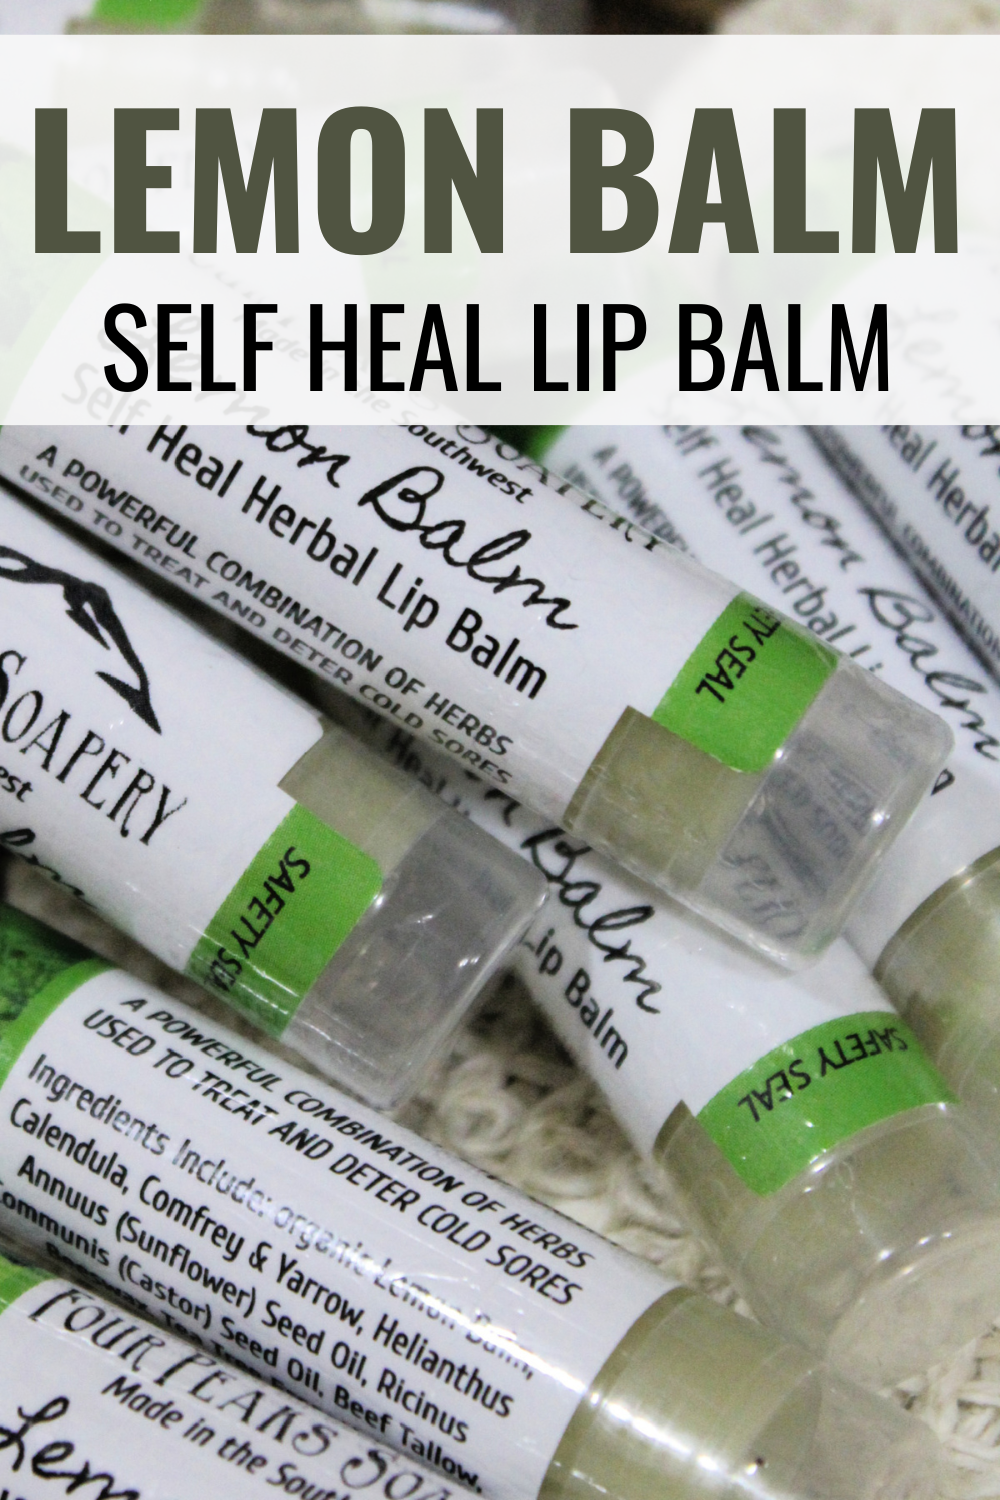 Lemon Balm is a powerful antiviral, and great way to ward-off cold sores! Learn how to make this Self Healing Lemon Balm Lip Balm to support healthy lips!